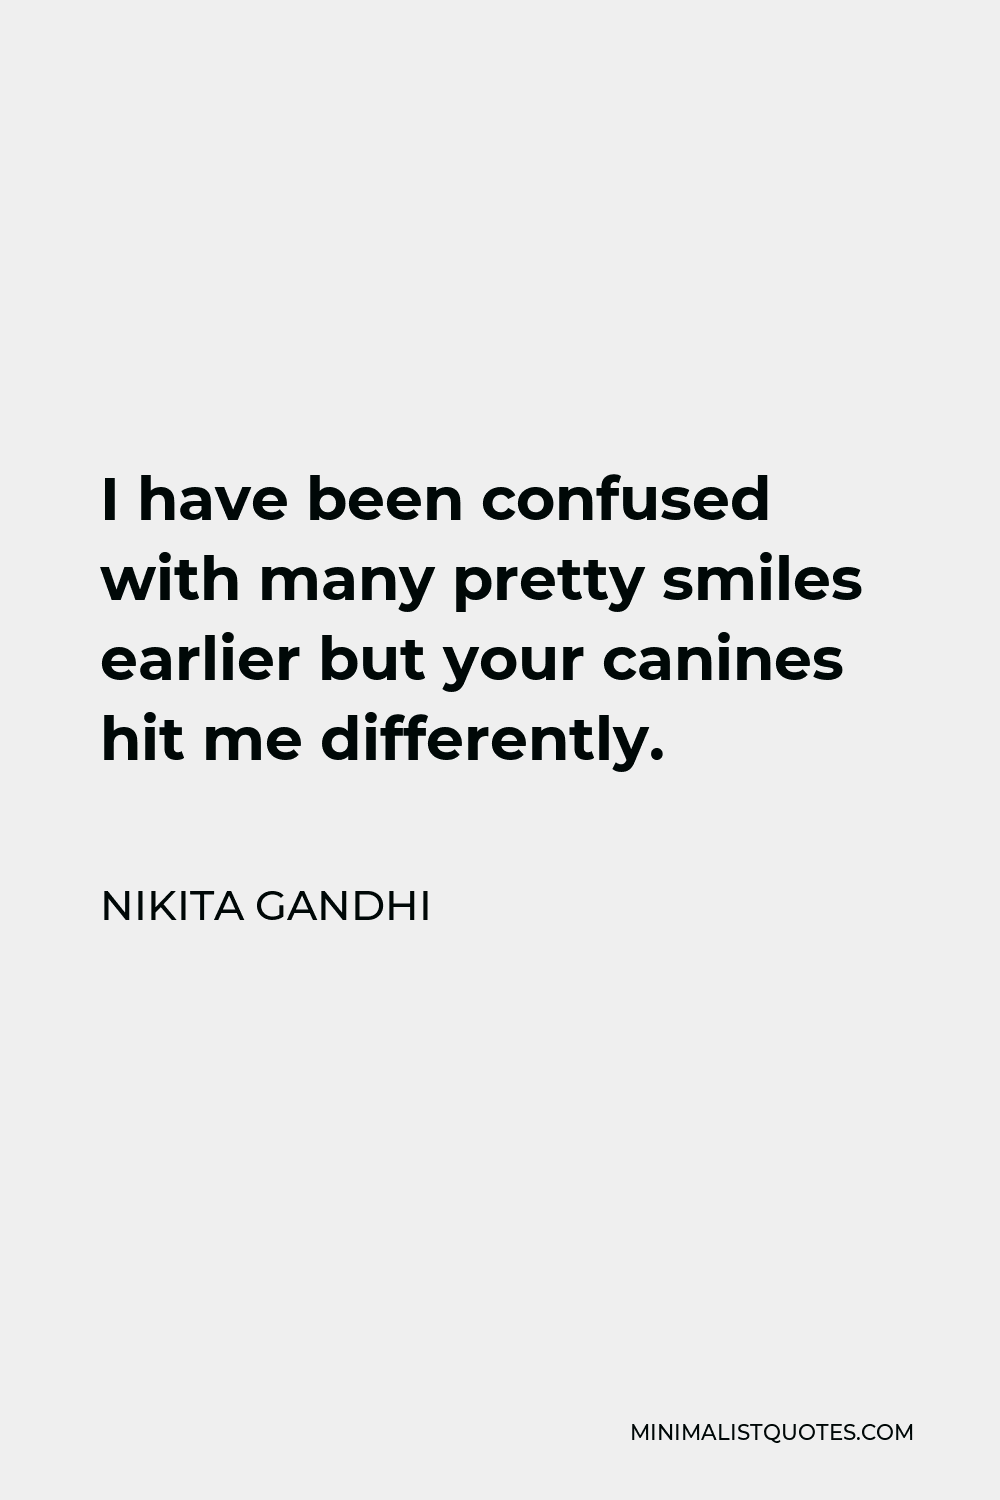 Nikita Gandhi Quote - I have been confused with many pretty smiles earlier but your canines hit me differently.